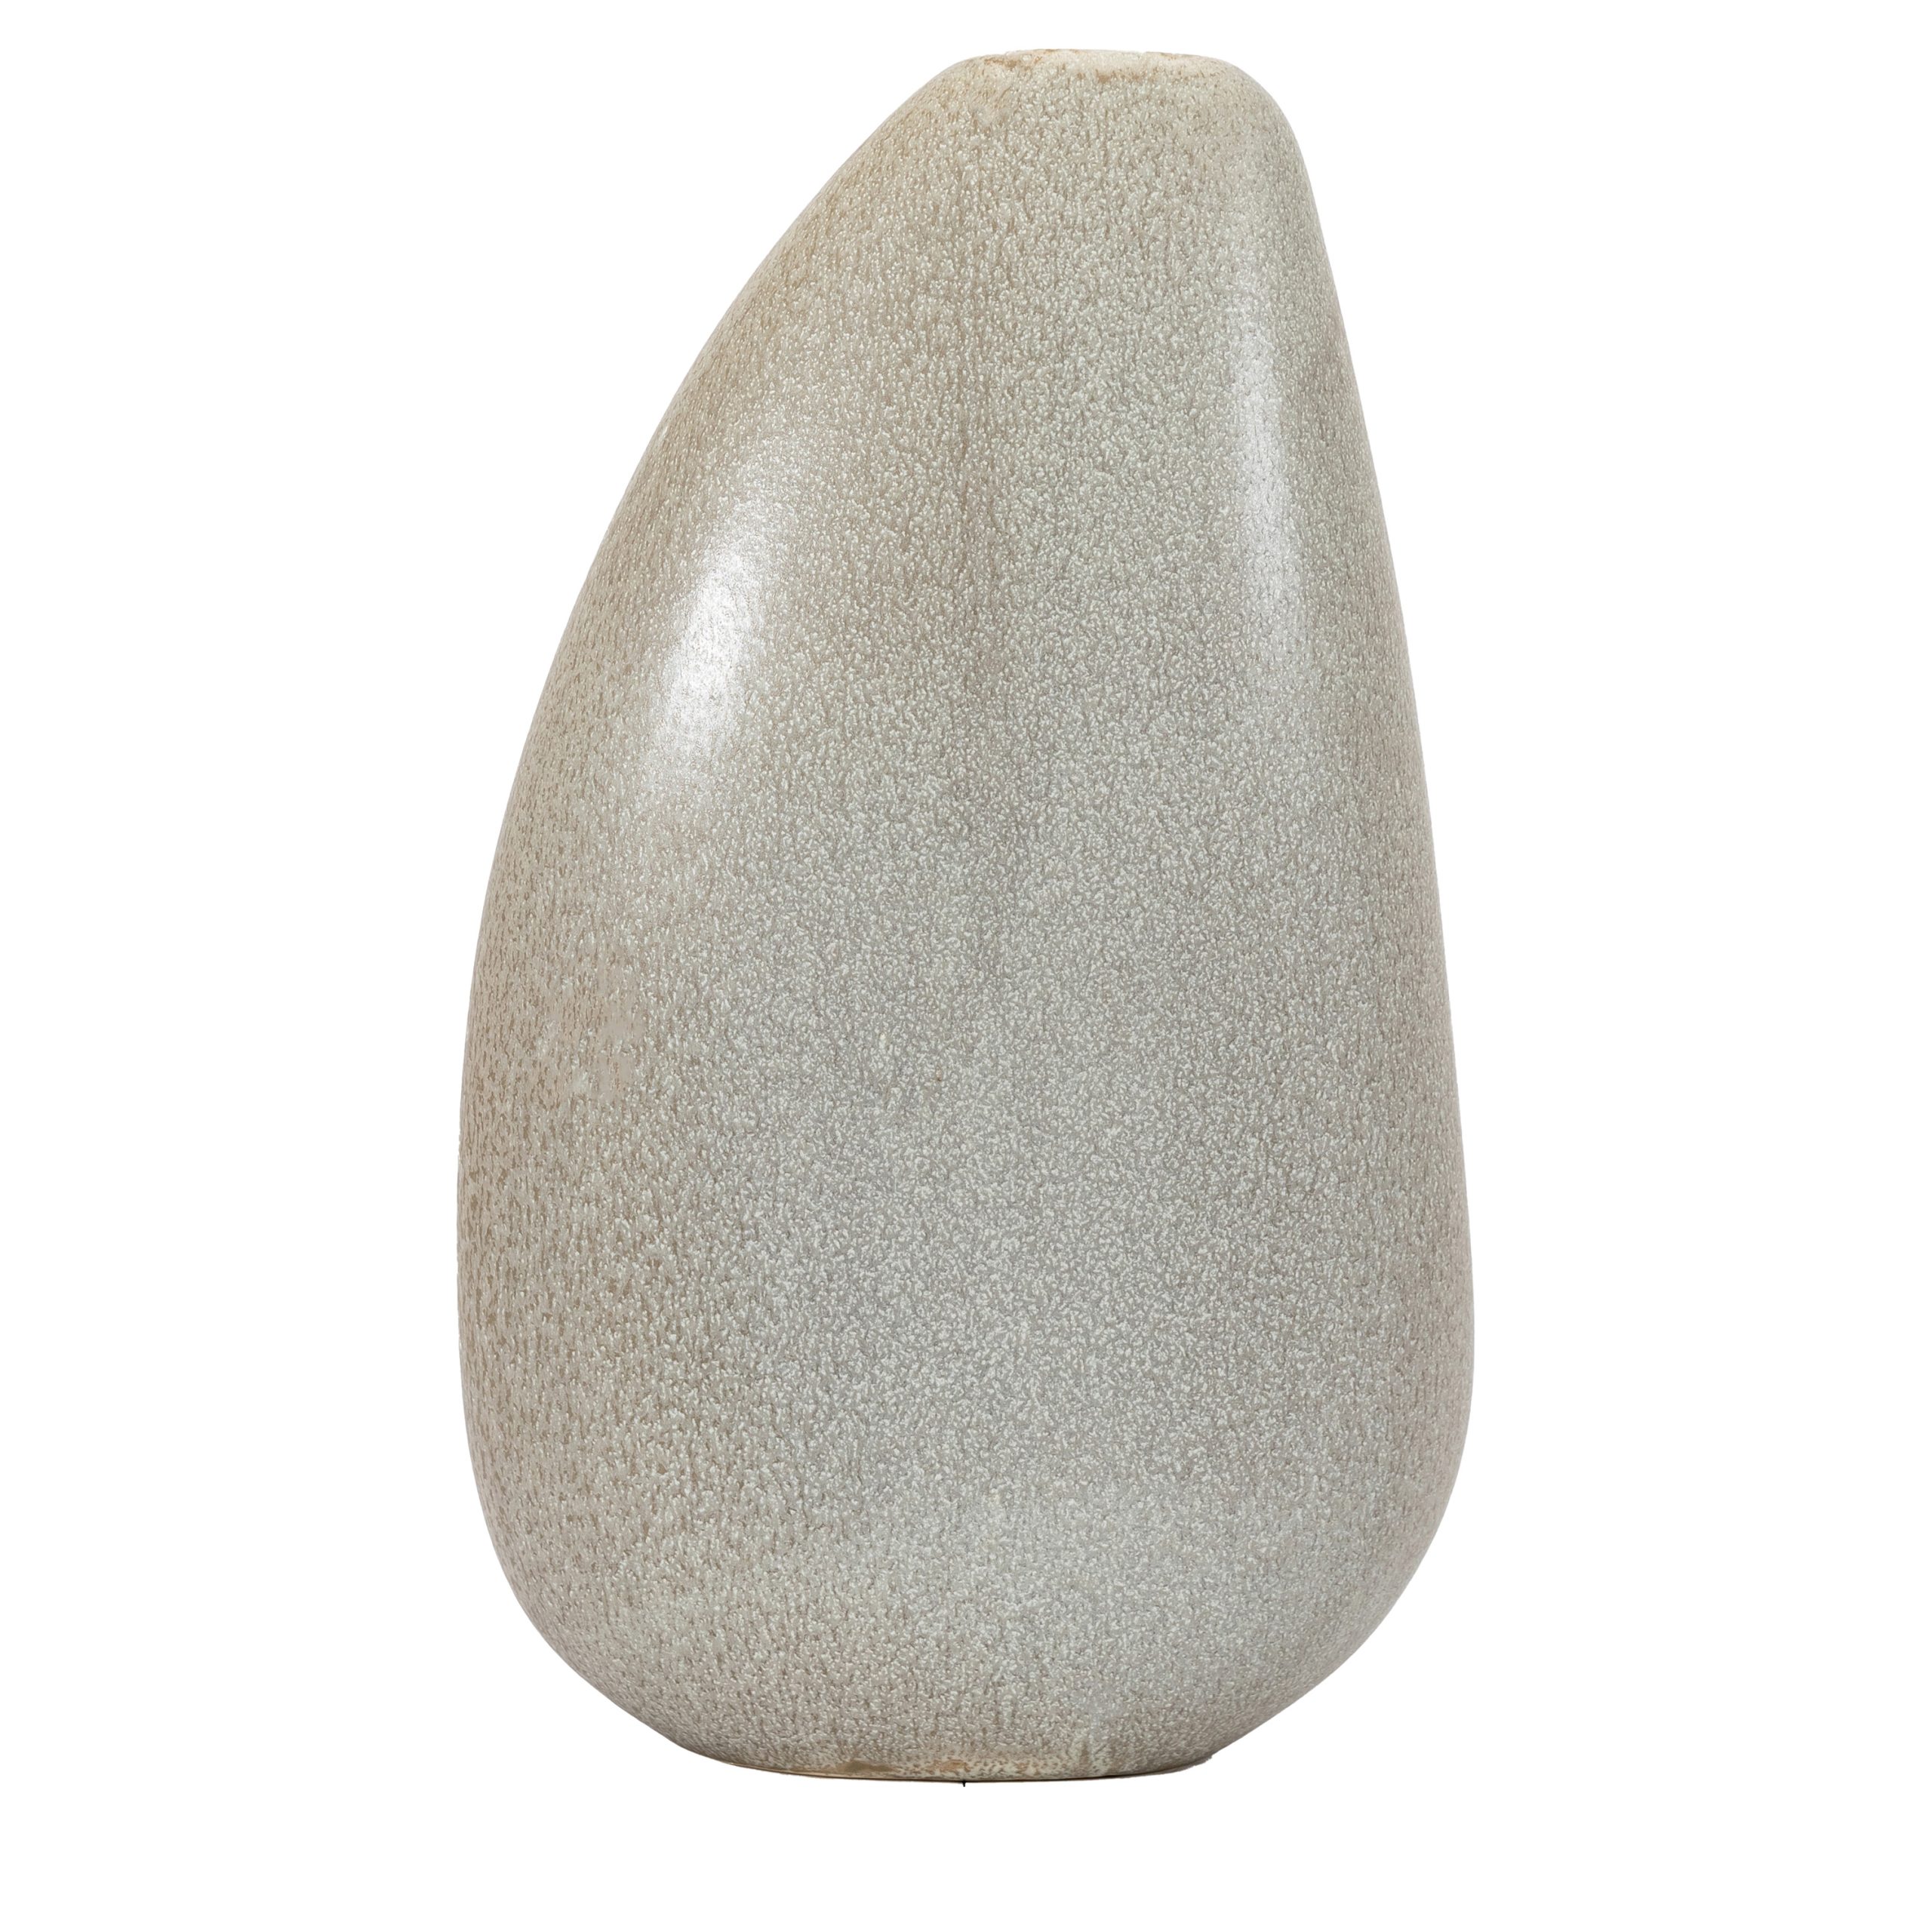 Gallery Direct Yui Pebble Vase Large